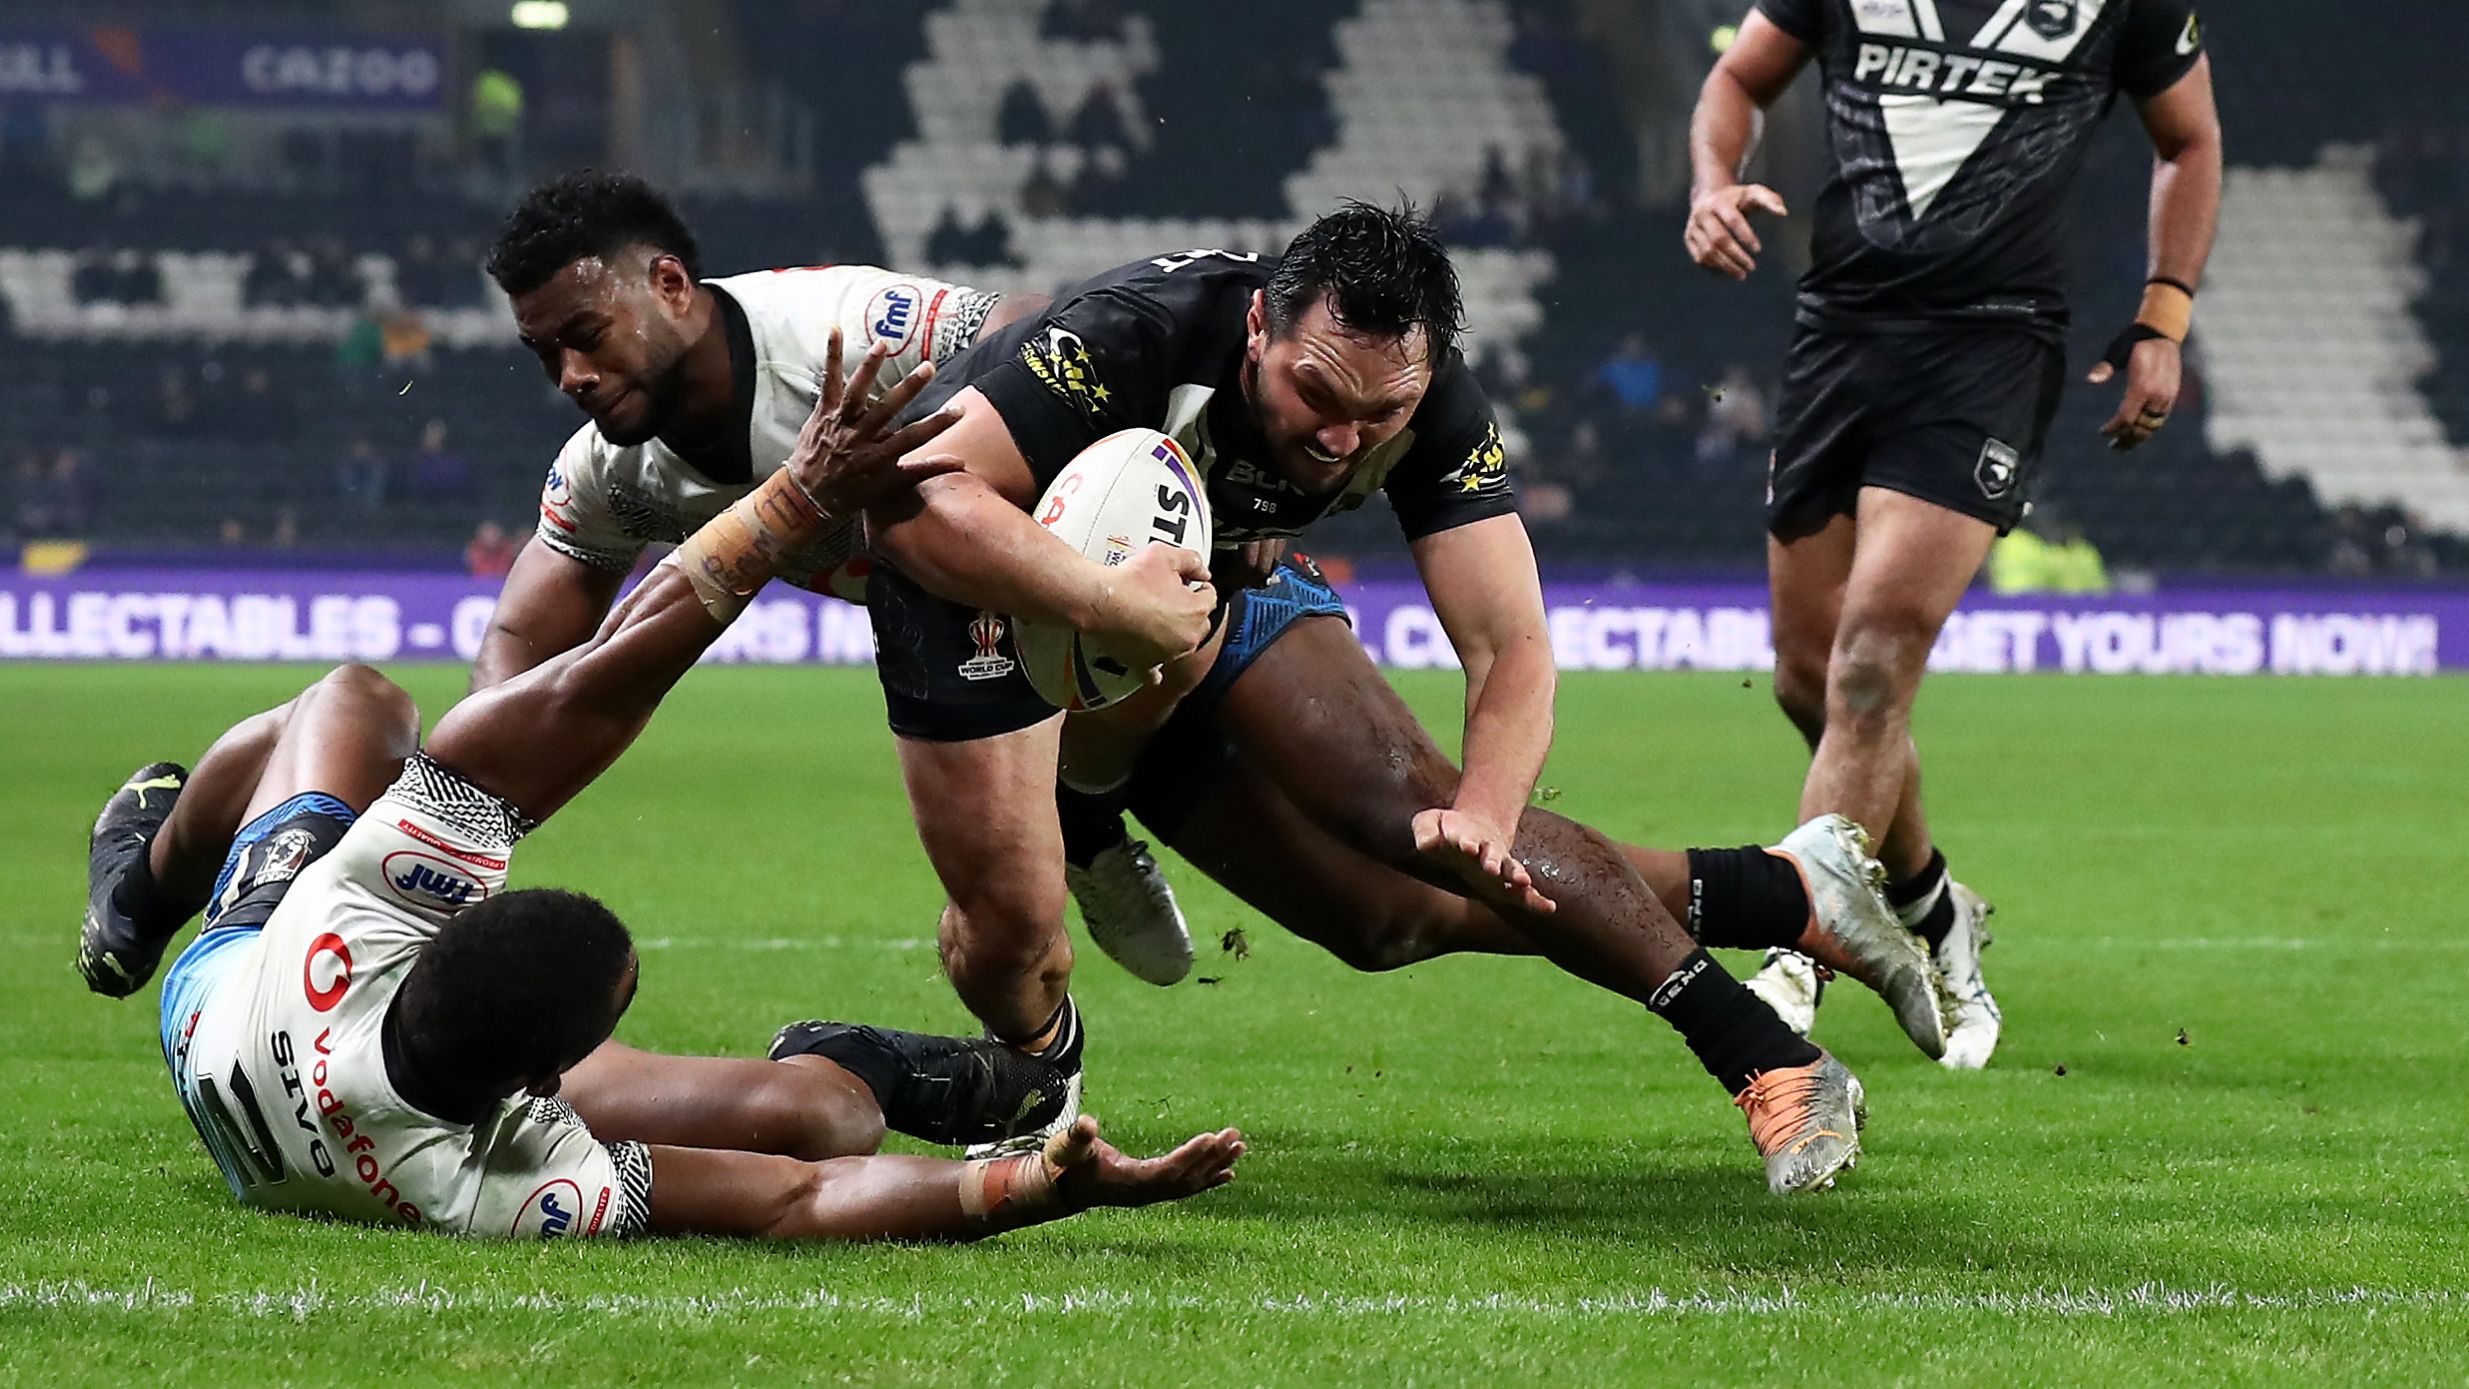 New Zealand v Fiji LIVE Watch Rugby League World Cup quarter-finals, plus radio commentary, text updates and latest score - Live